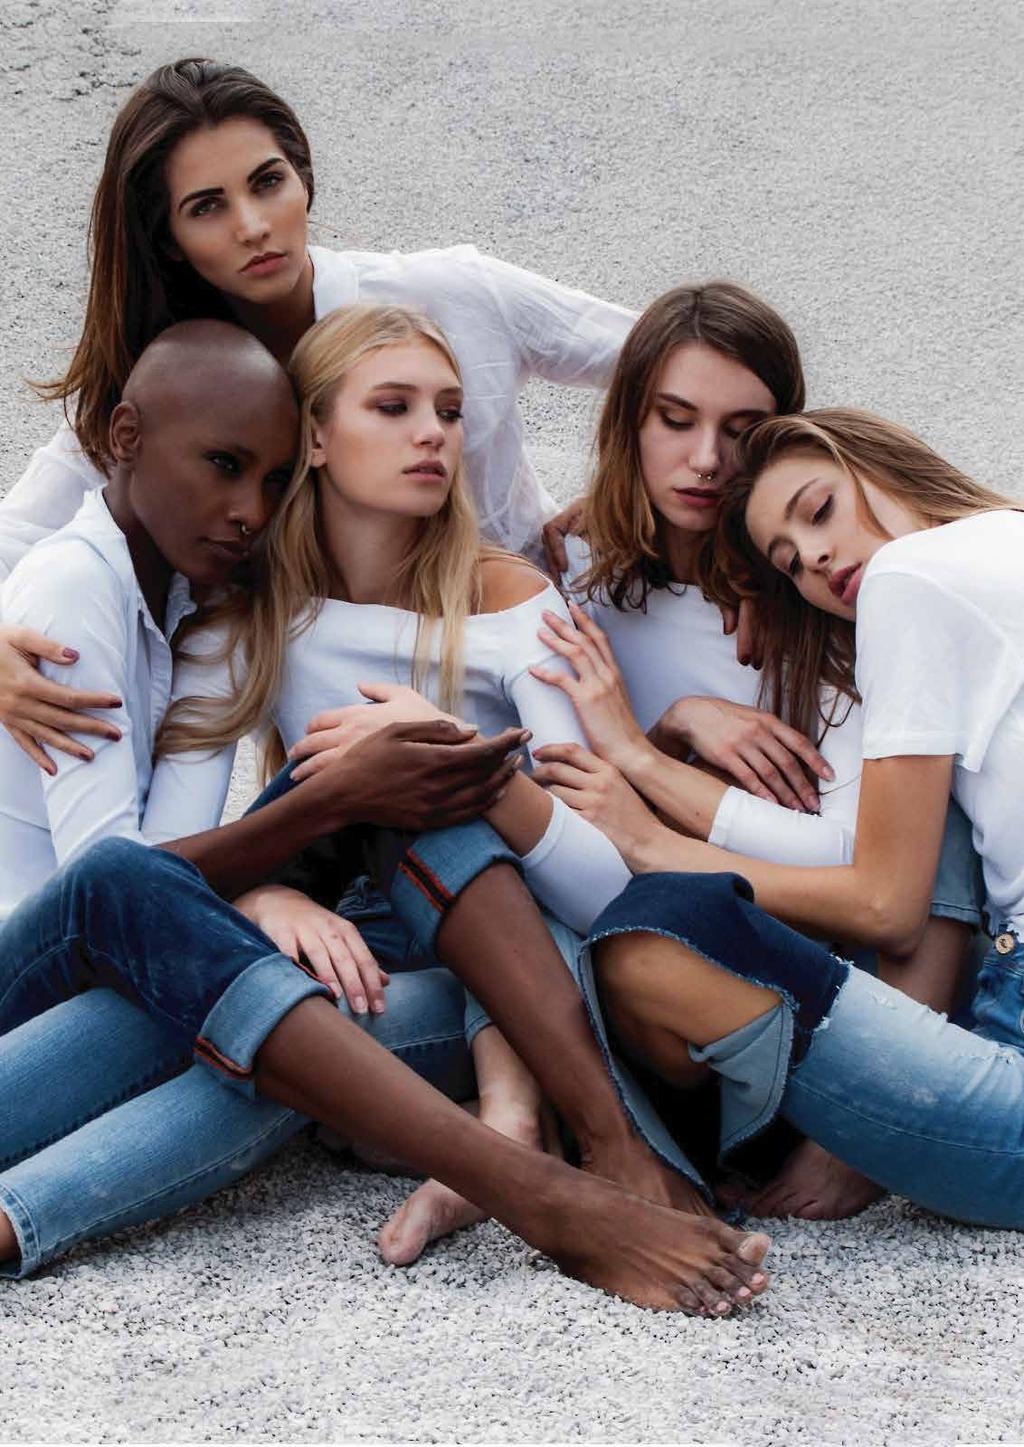 //THE DENIM With six different procedures for the control of the quality, The Empowering Denim is made in Italy and designed in Milan using the highest quality of denim.